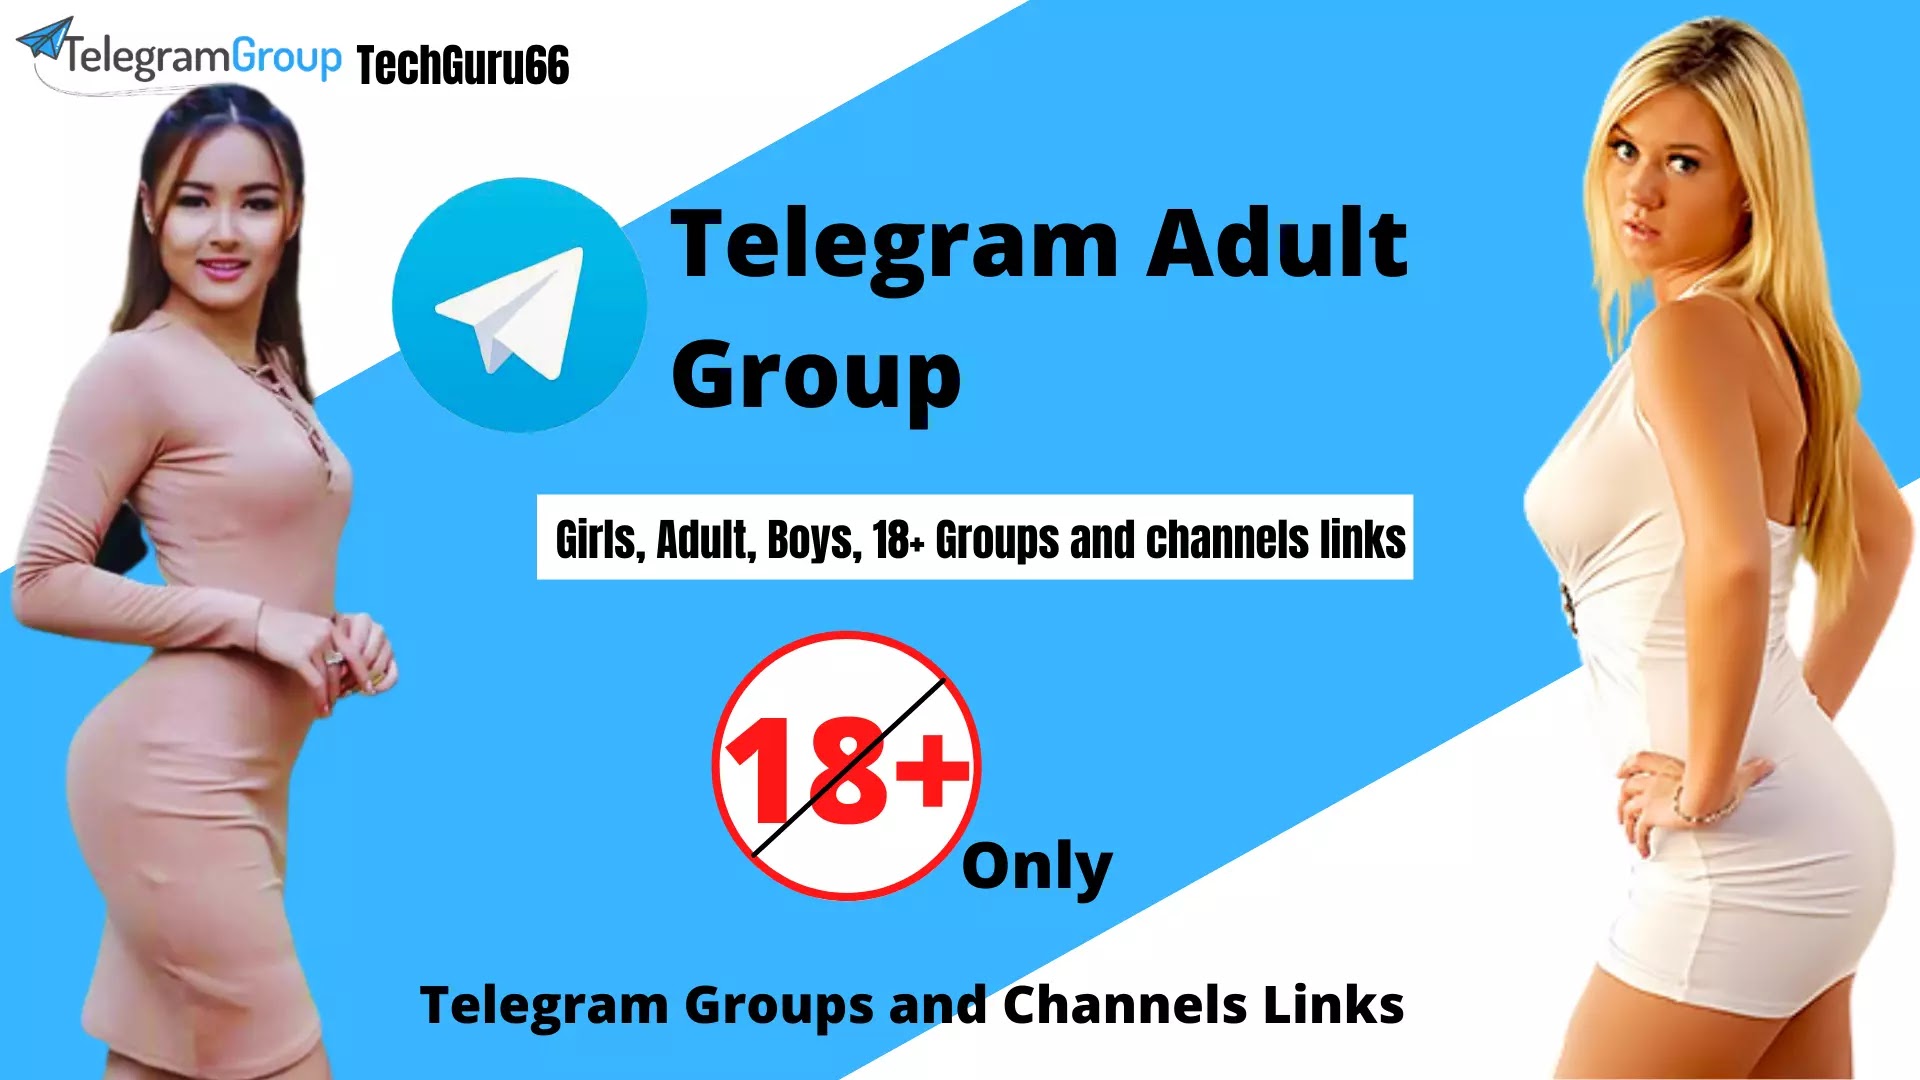 international dating telegram group sorted by. relevance. 